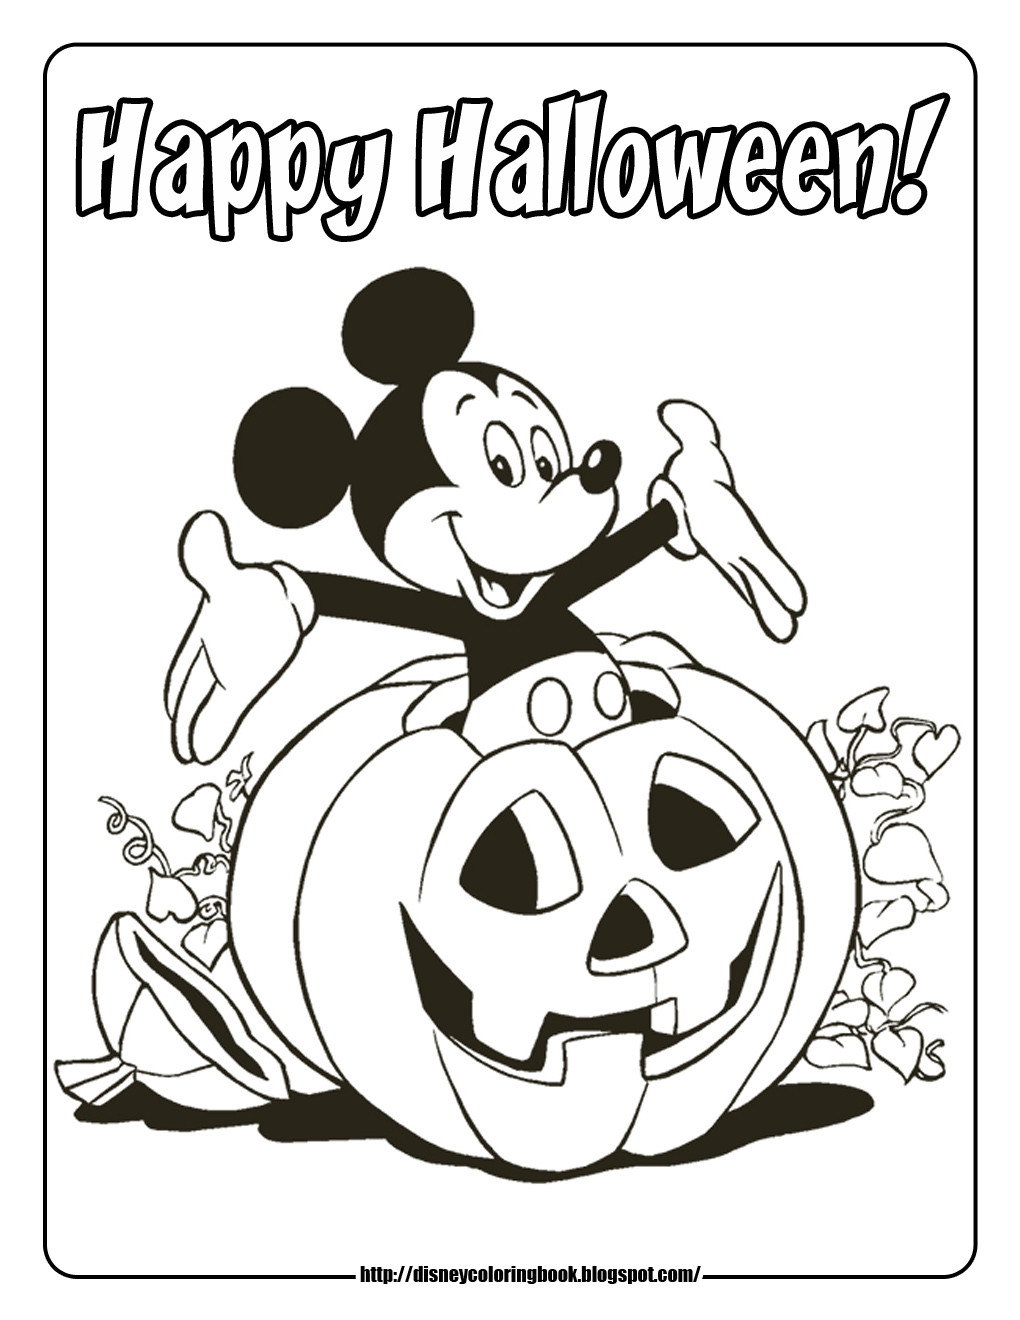 Halloween Coloring Pages Pdf
 disney halloween coloring pages pdf